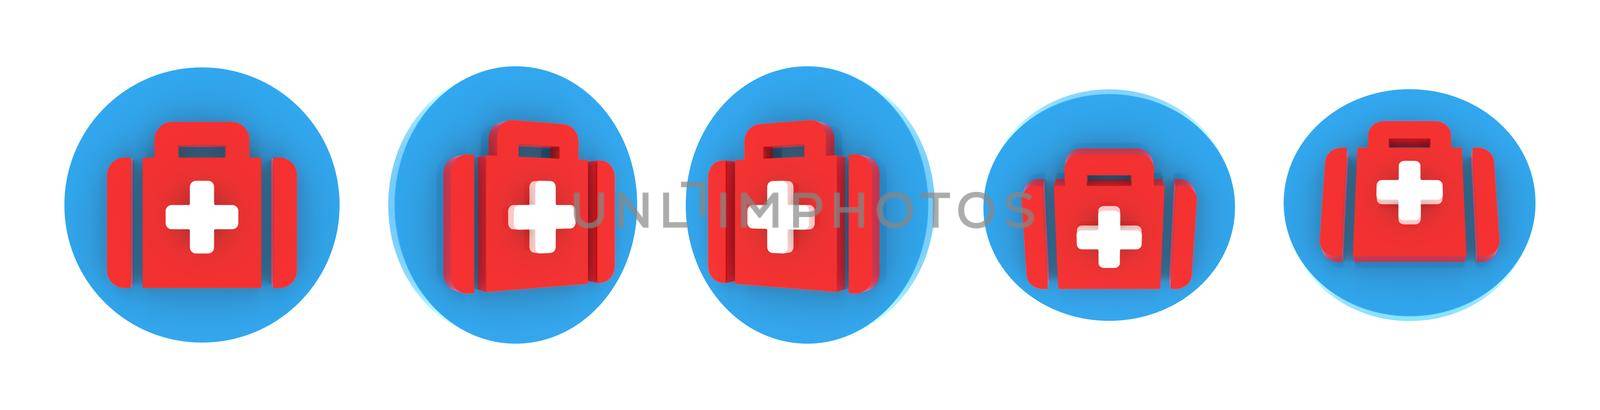 Volumetric round medical icon set, blue, red and white soft plastic. Different viewing angles, 3d rendering illustration